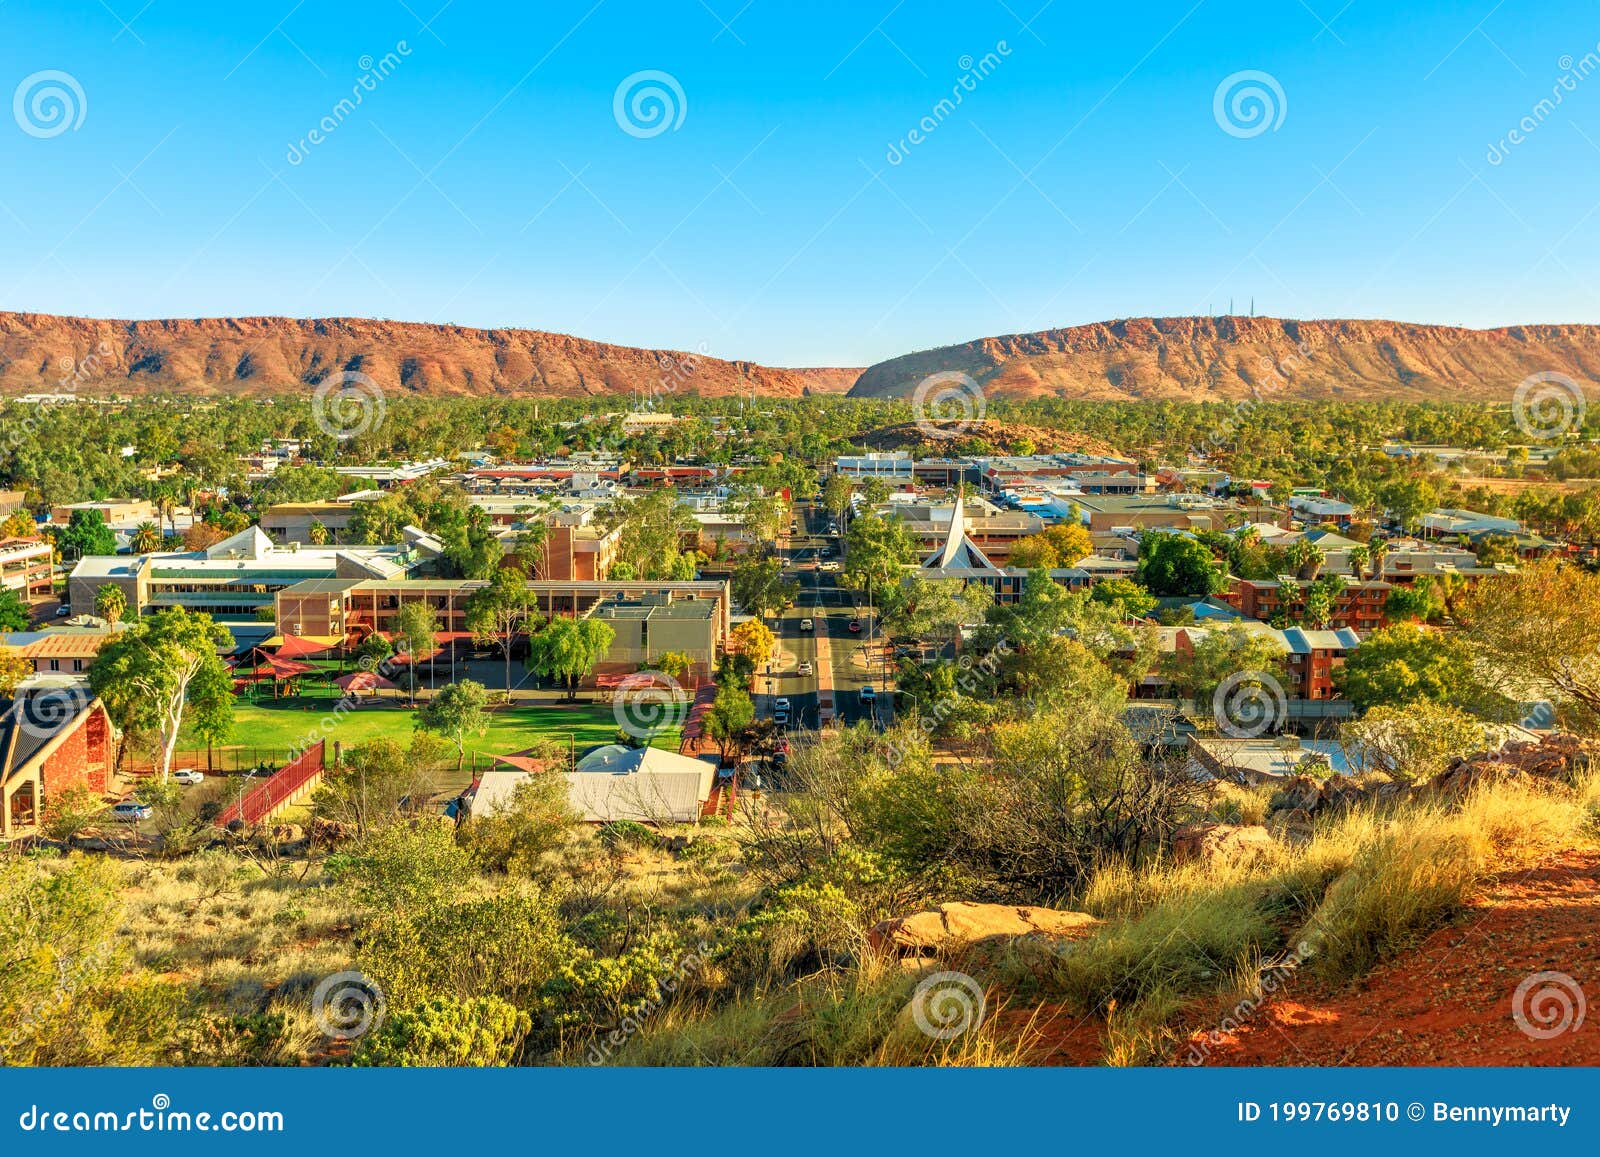 Aerial view of Alice Springs, Australia showing its size and layout